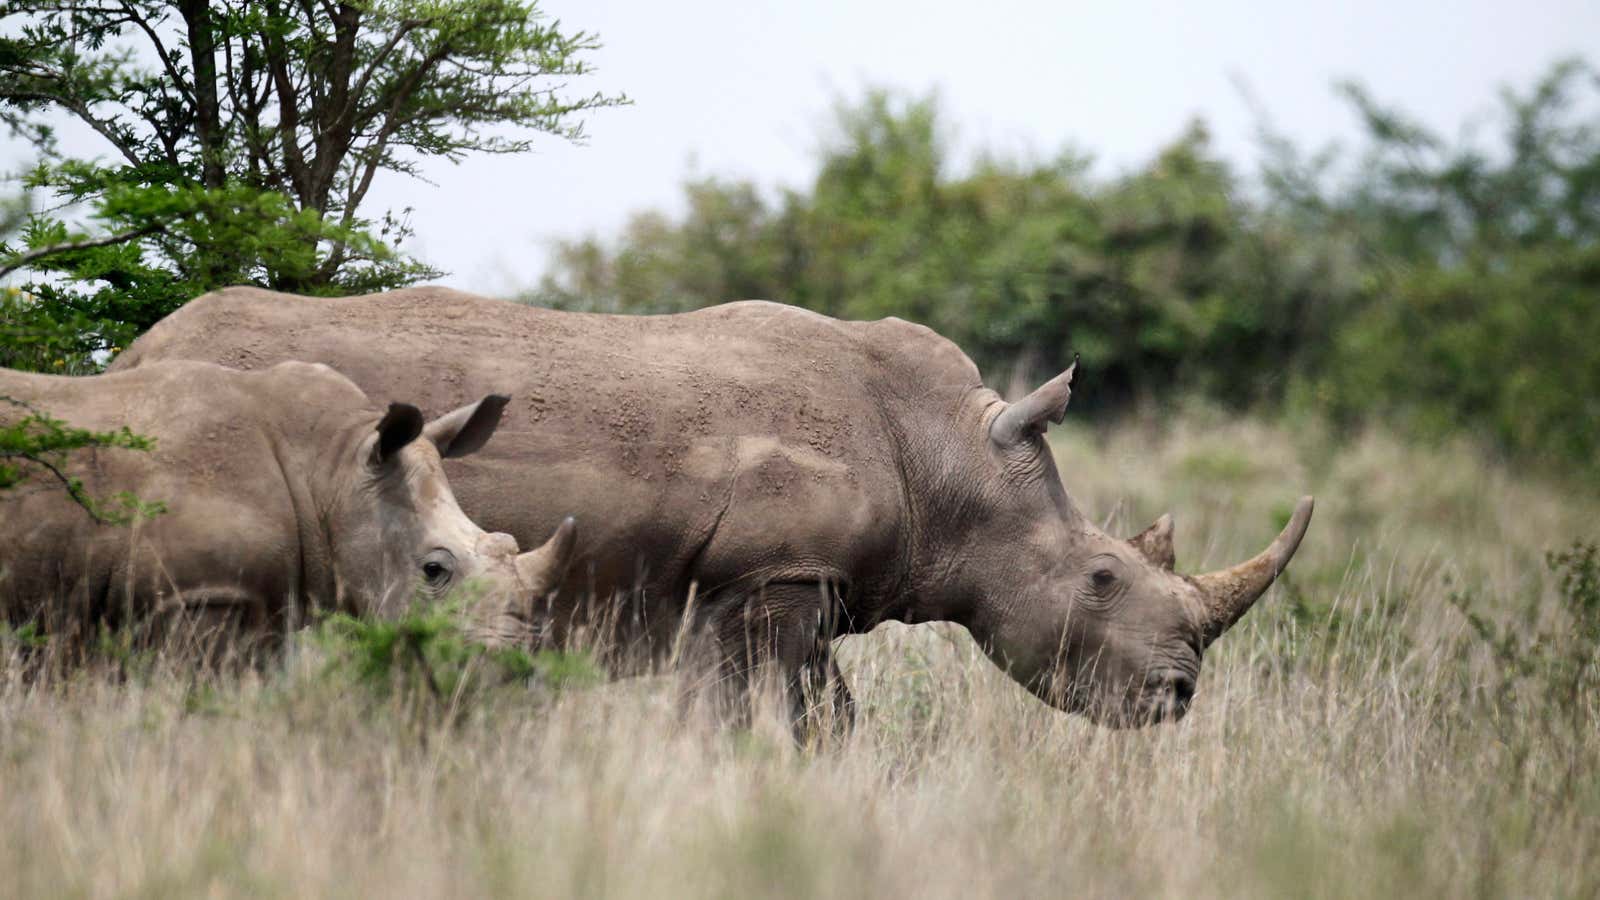 Since 2007 there has been a 1,000% increase in poaching in South Africa alone.